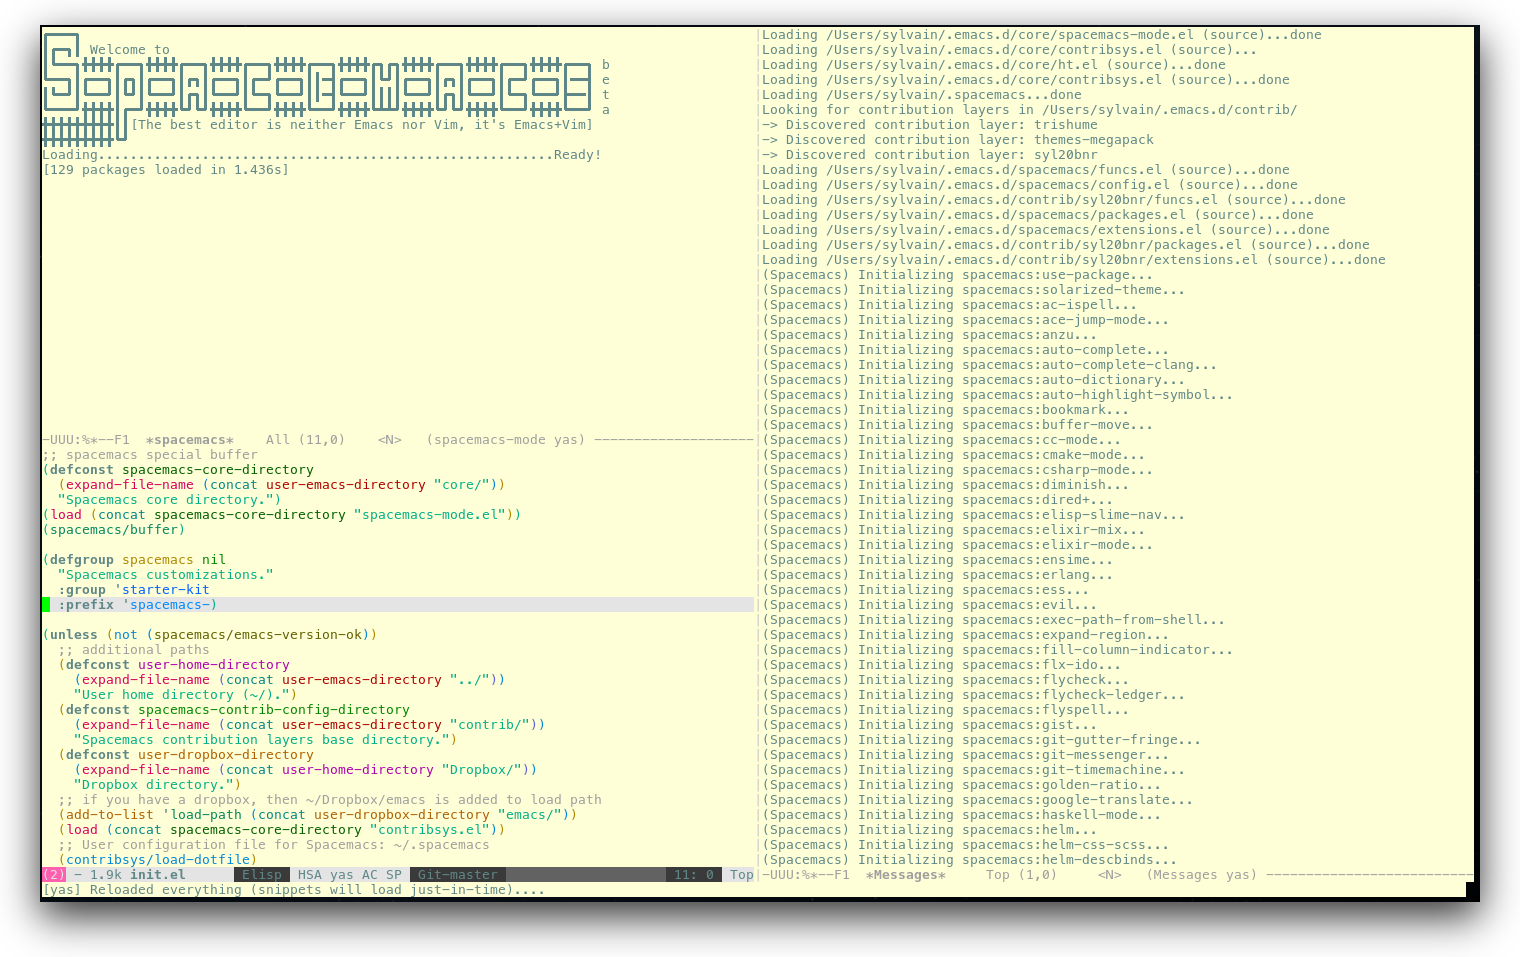 /TakeV/spacemacs/media/commit/80a9add5af67047dbae72be1e54f605908203cca/doc/img/spacemacs-urxvt.png